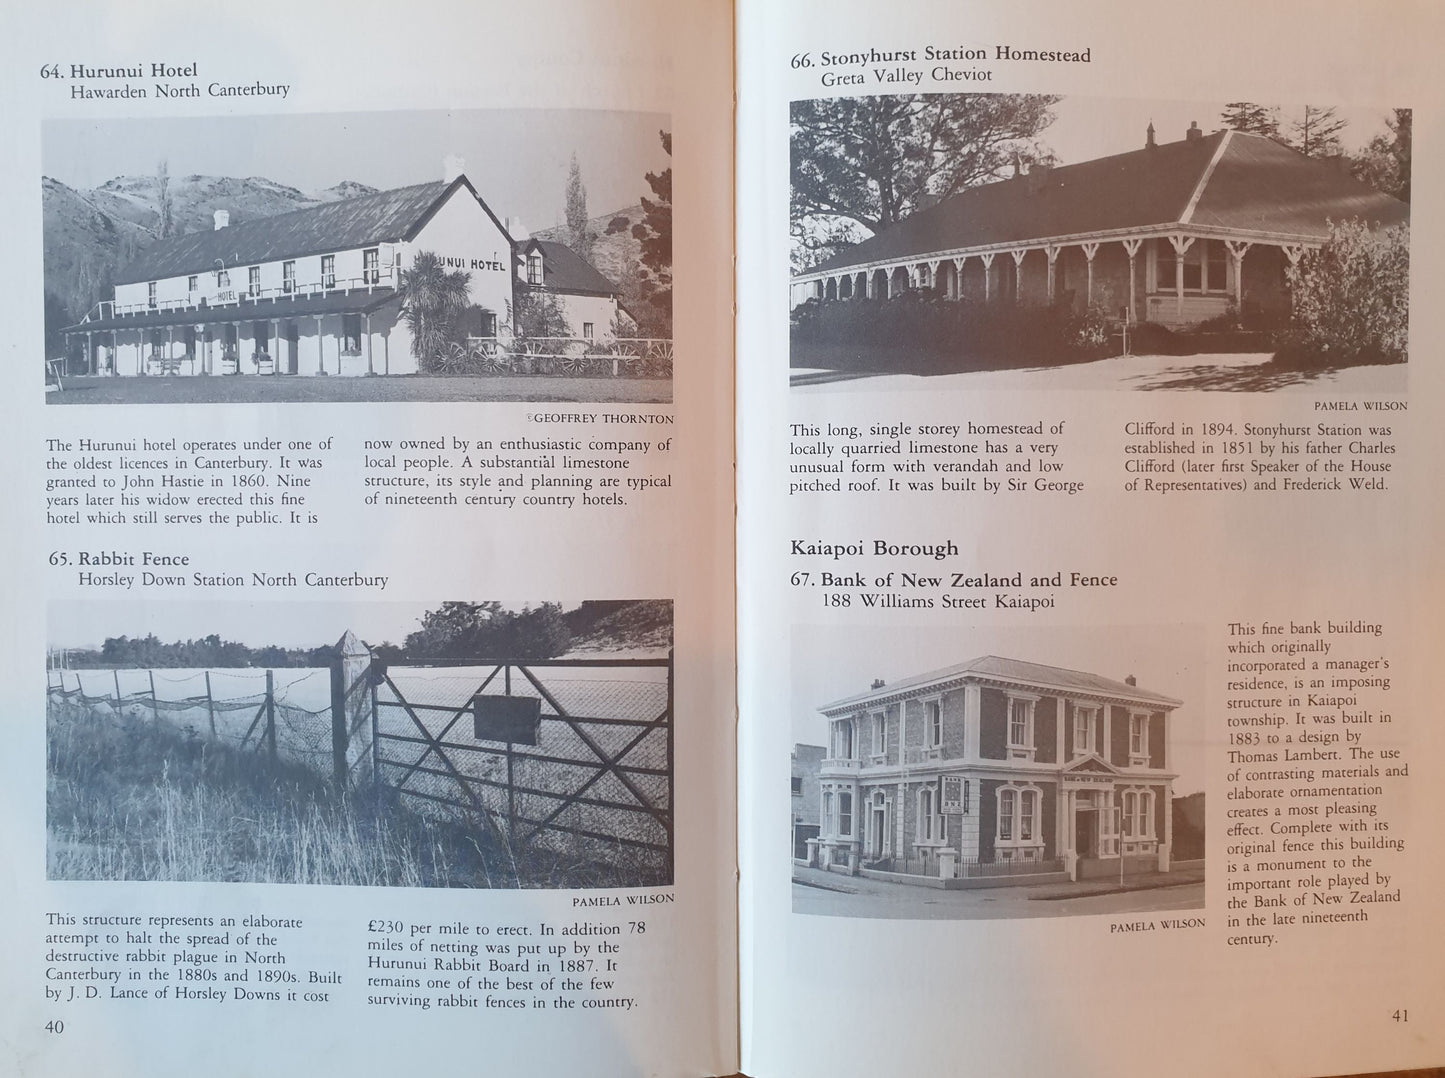 Historic Buildings of Canterbury and South Canterbury